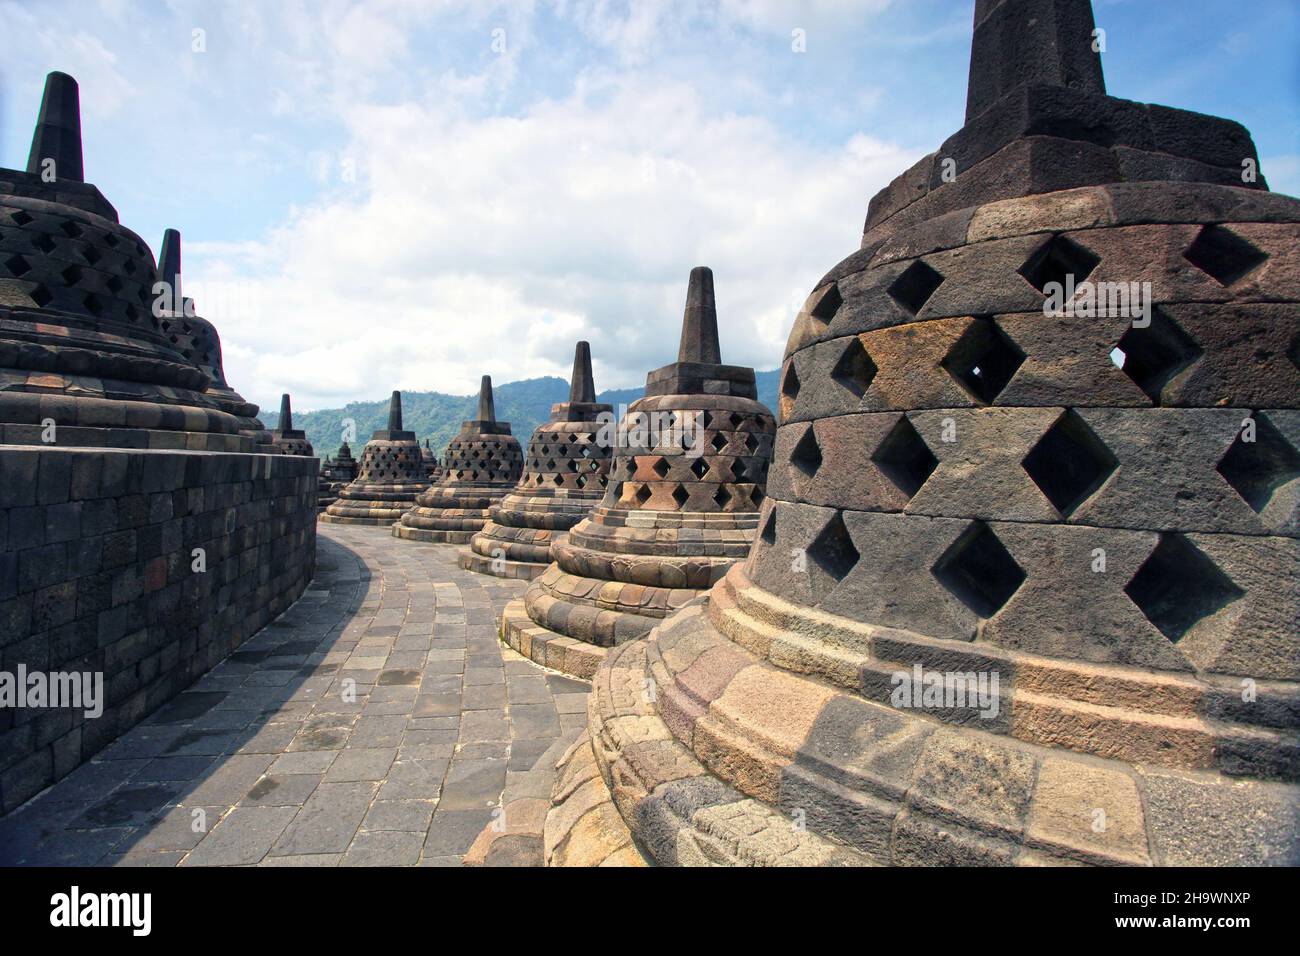 Candi Borobudur or Borobudur Temple in Magelang, Central Java, Indonesia, which was built in the 7th Century AD. Stock Photo